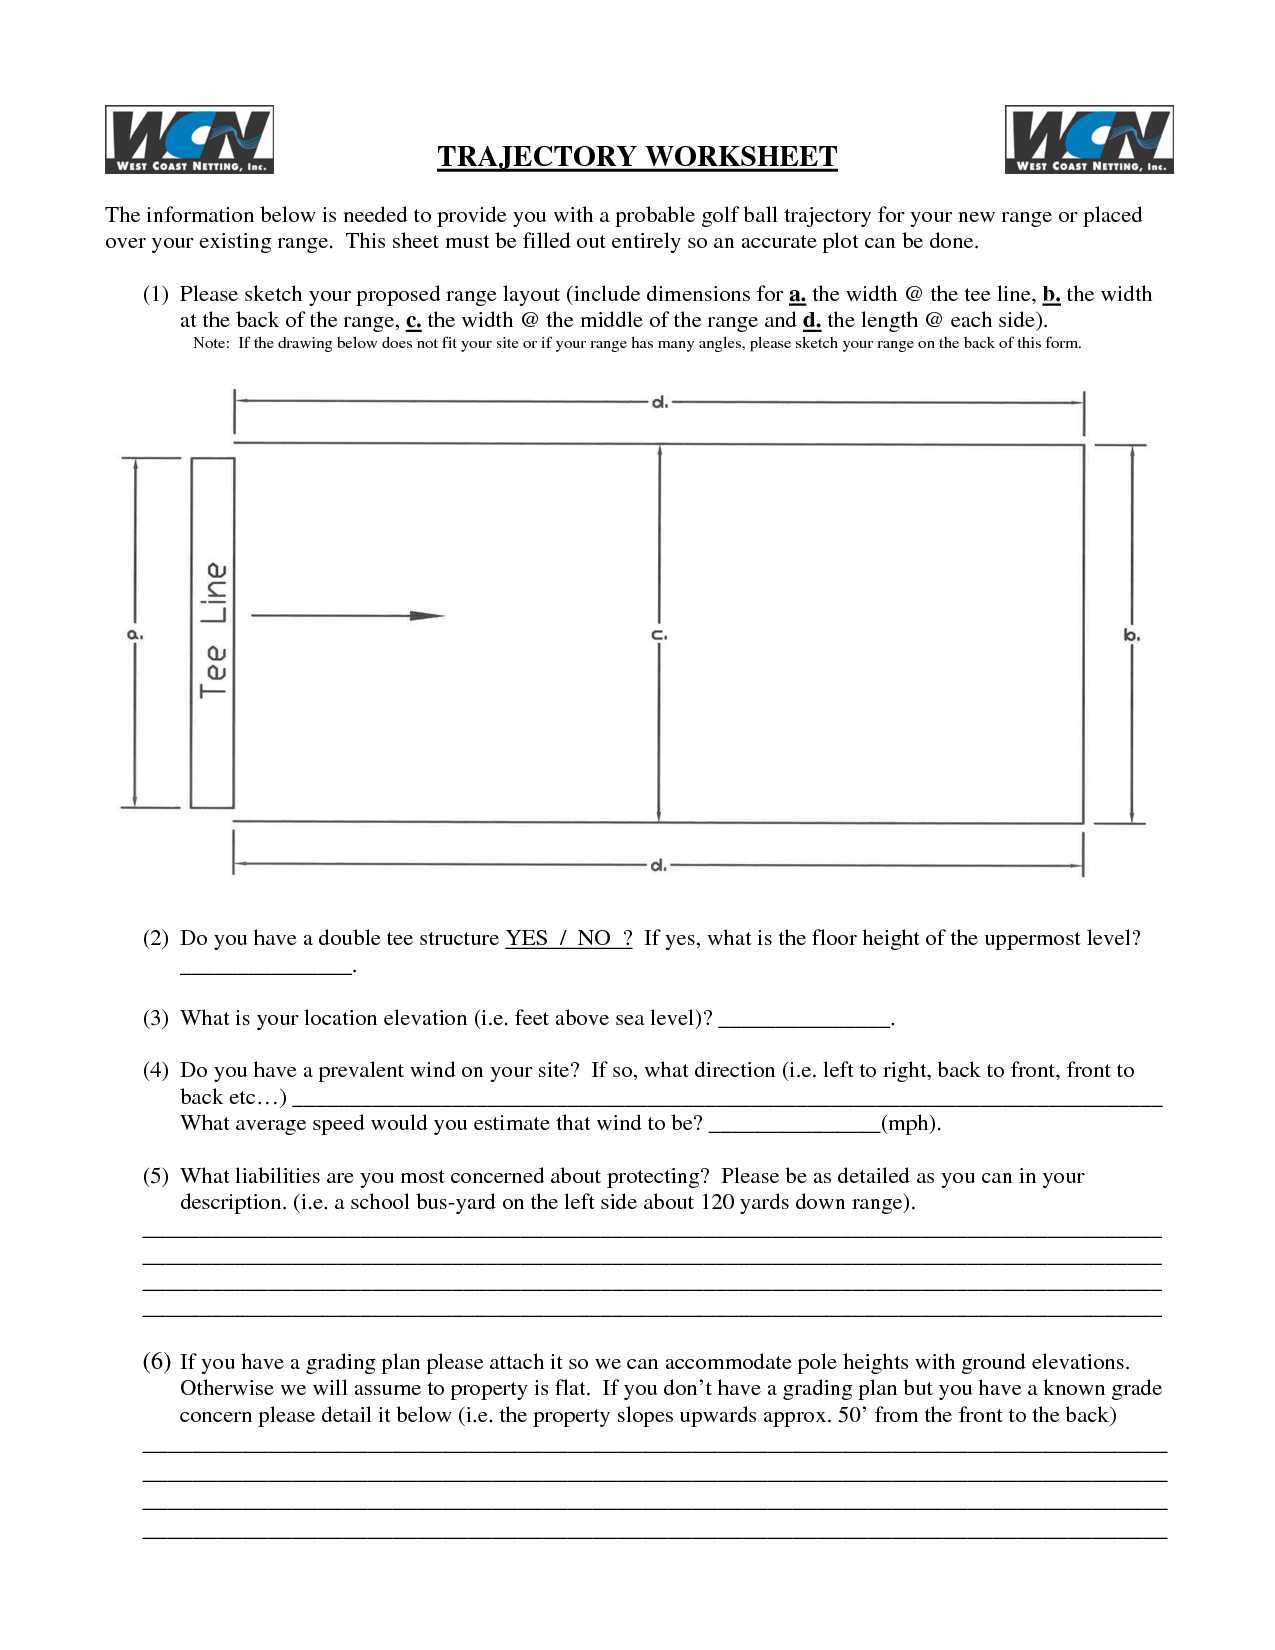 Grief and Loss Worksheets for Adults or Coping with Loss Worksheet 15 Best Ideas About Grief Counseling